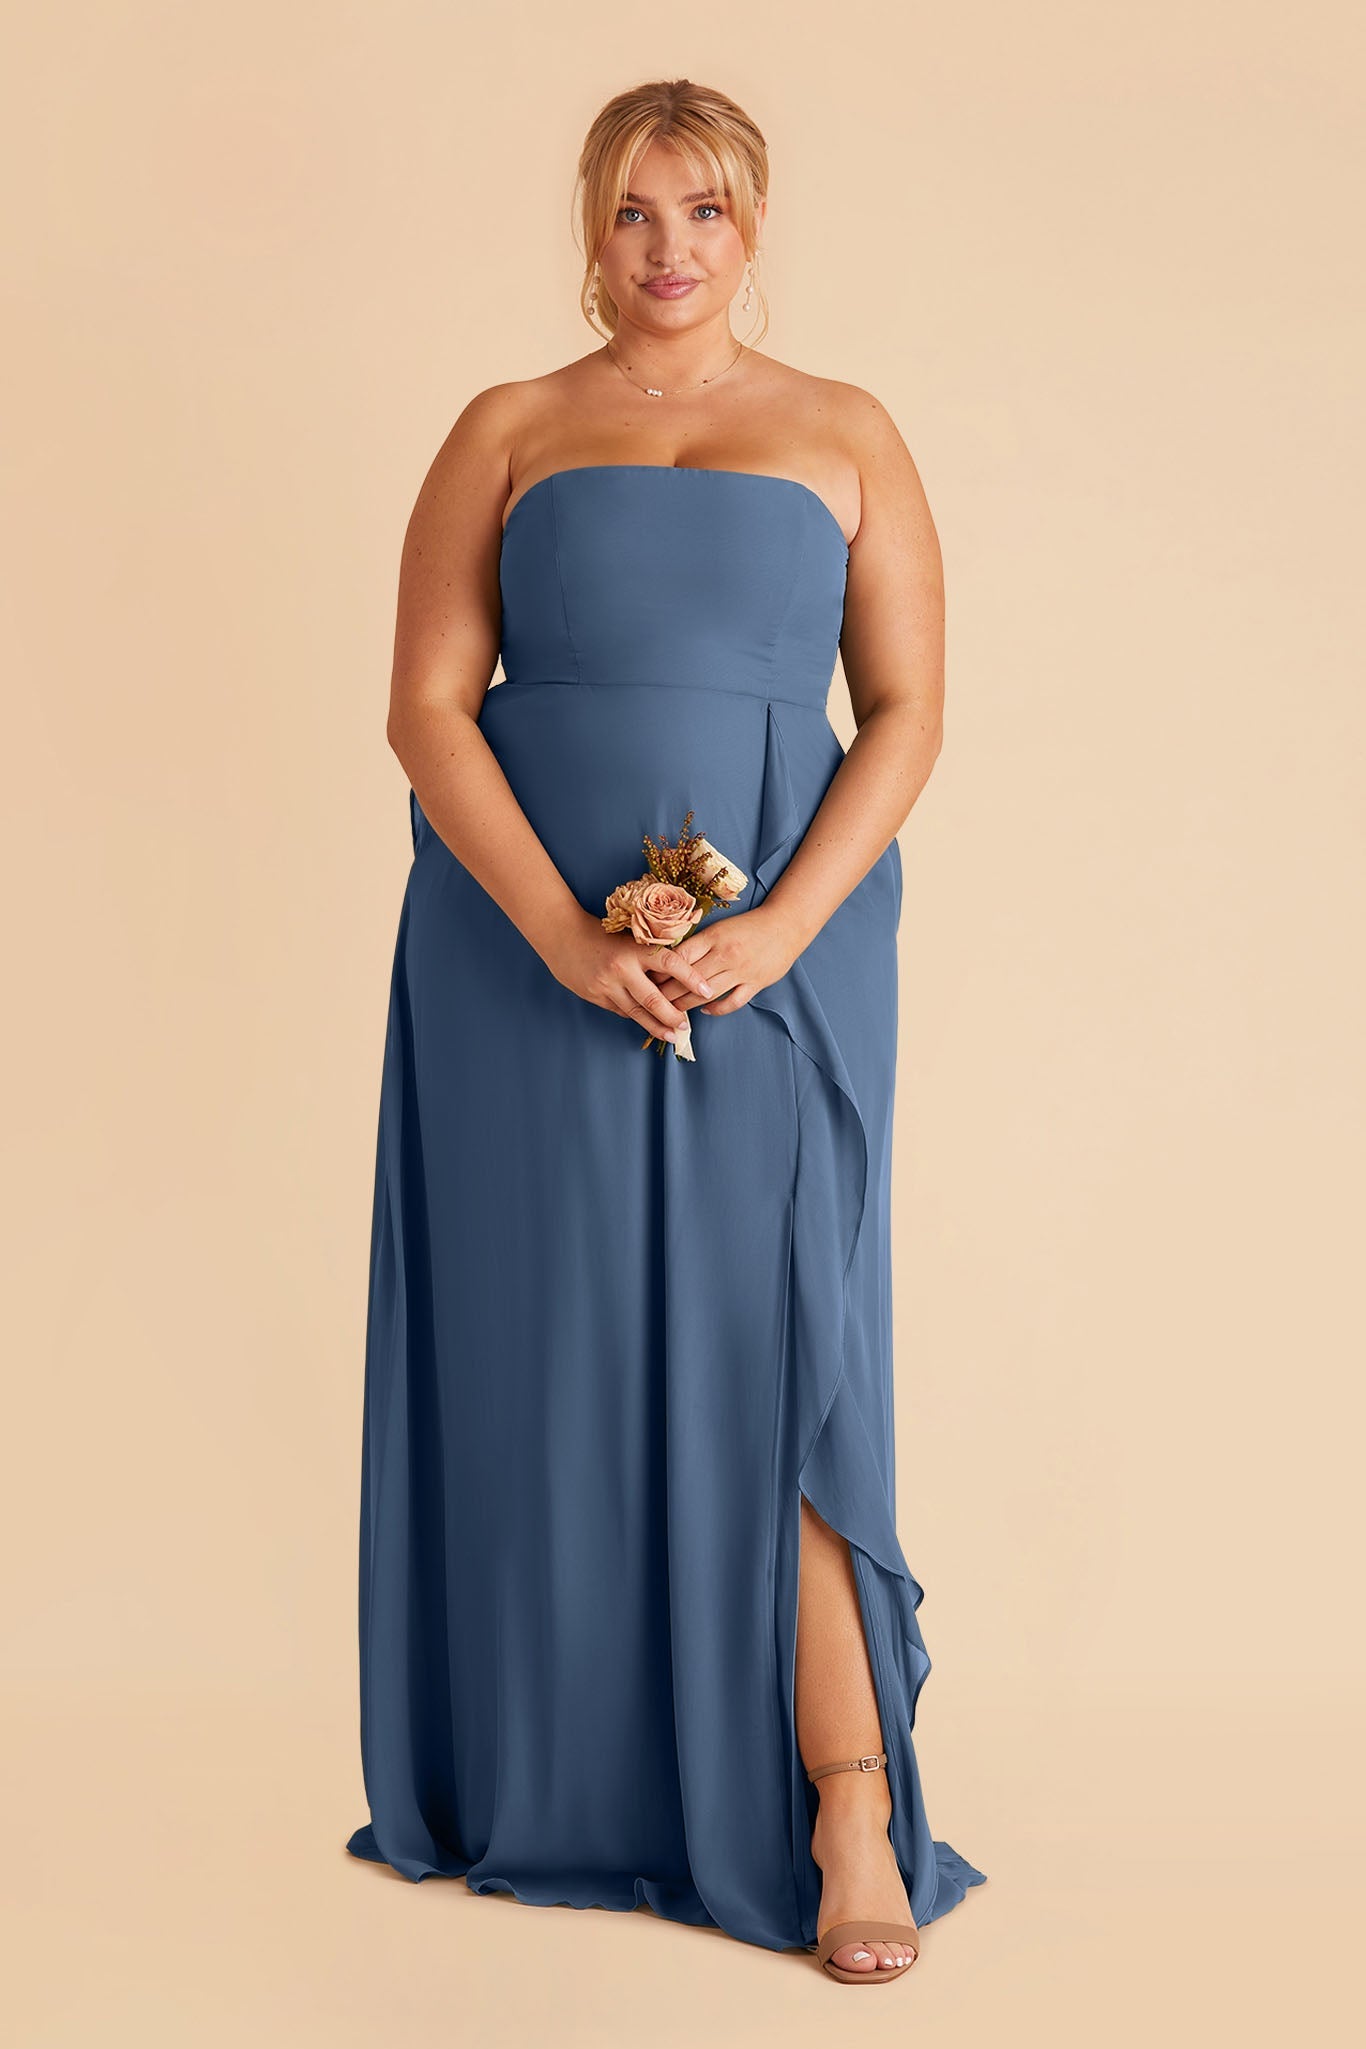 Other Birdy Grey the Devin Convertible Dress - Twilight Color